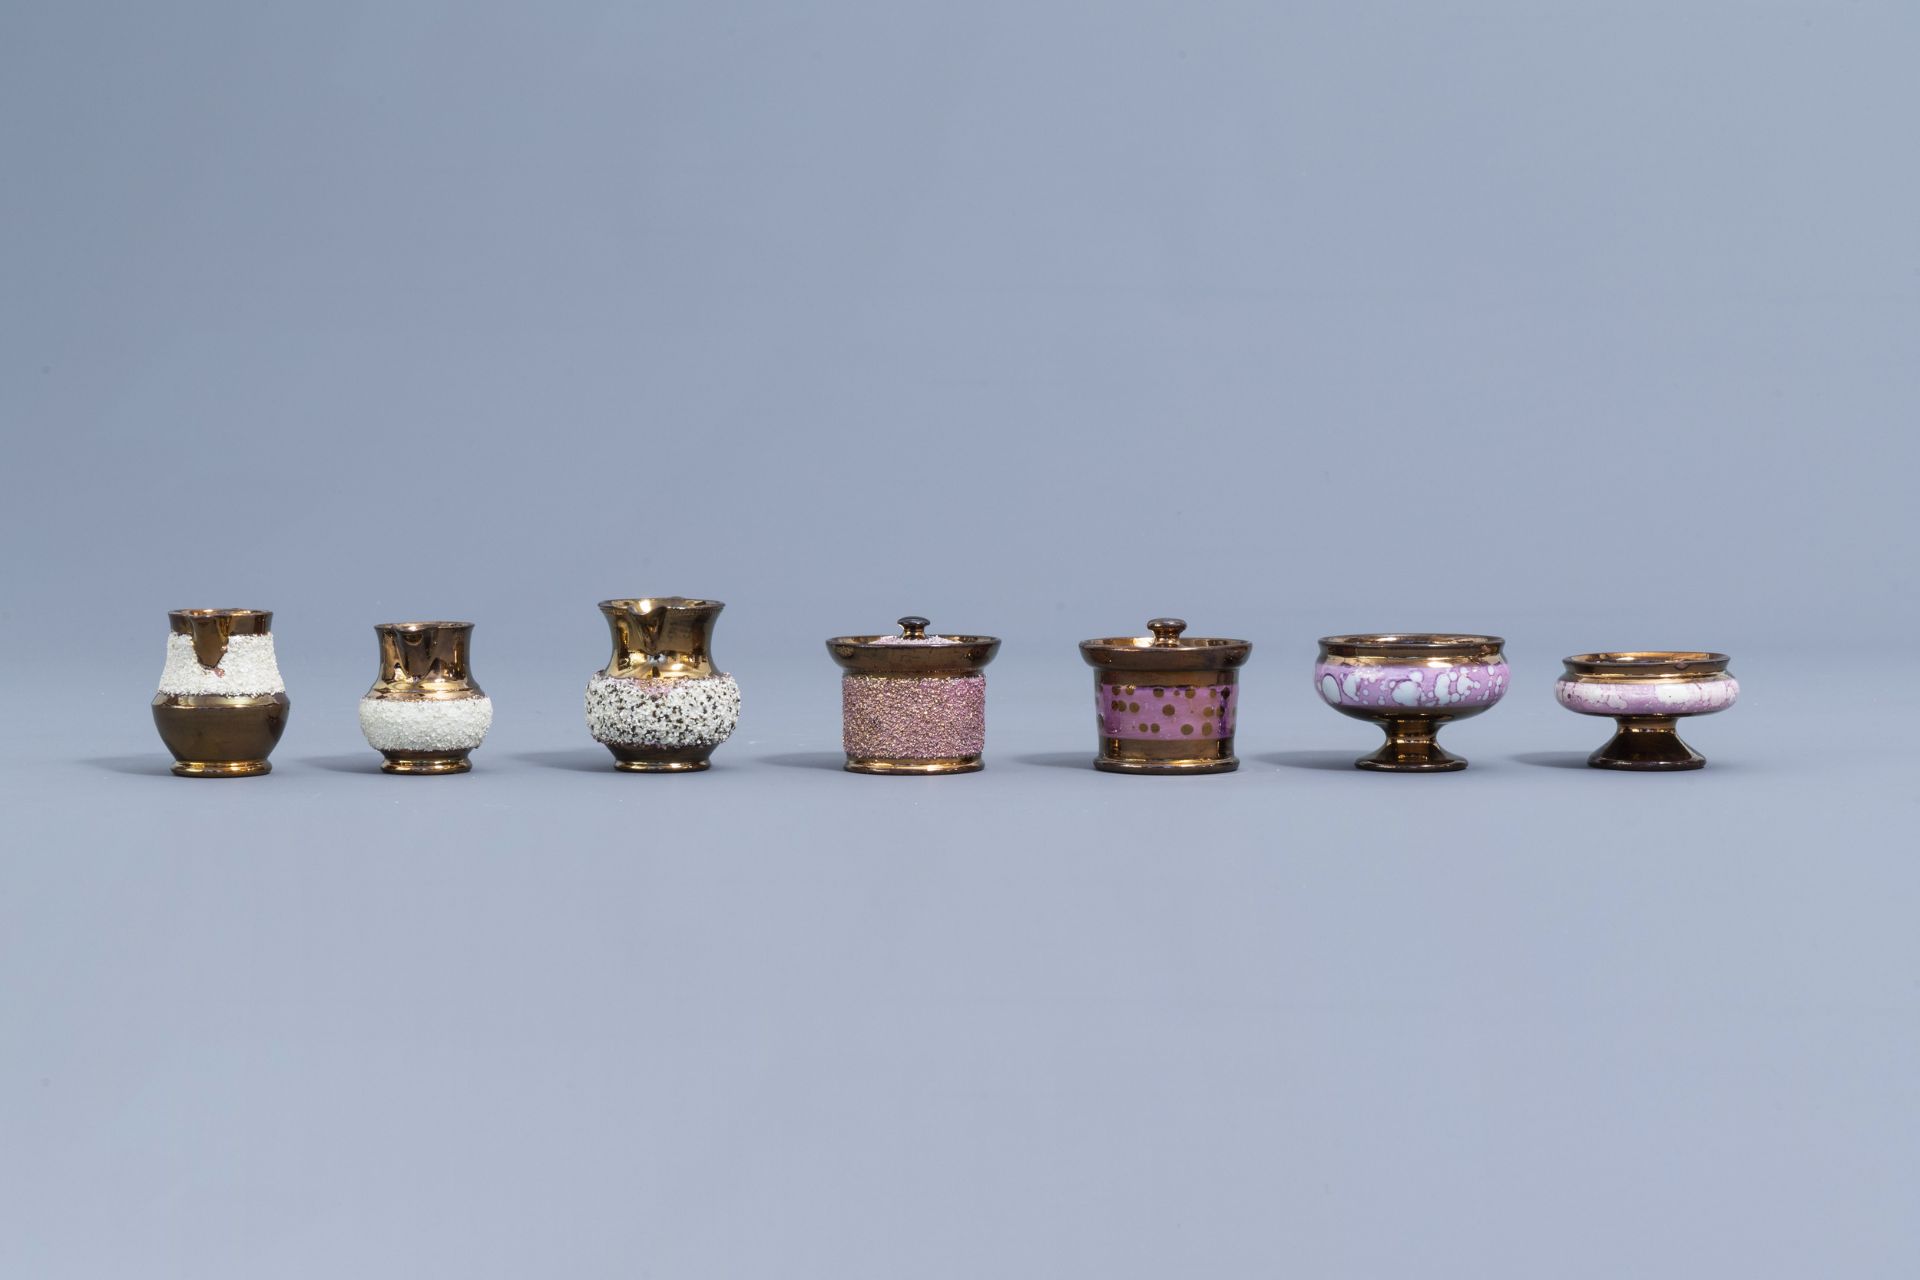 A varied collection of English lustreware items, 19th C. - Image 9 of 42